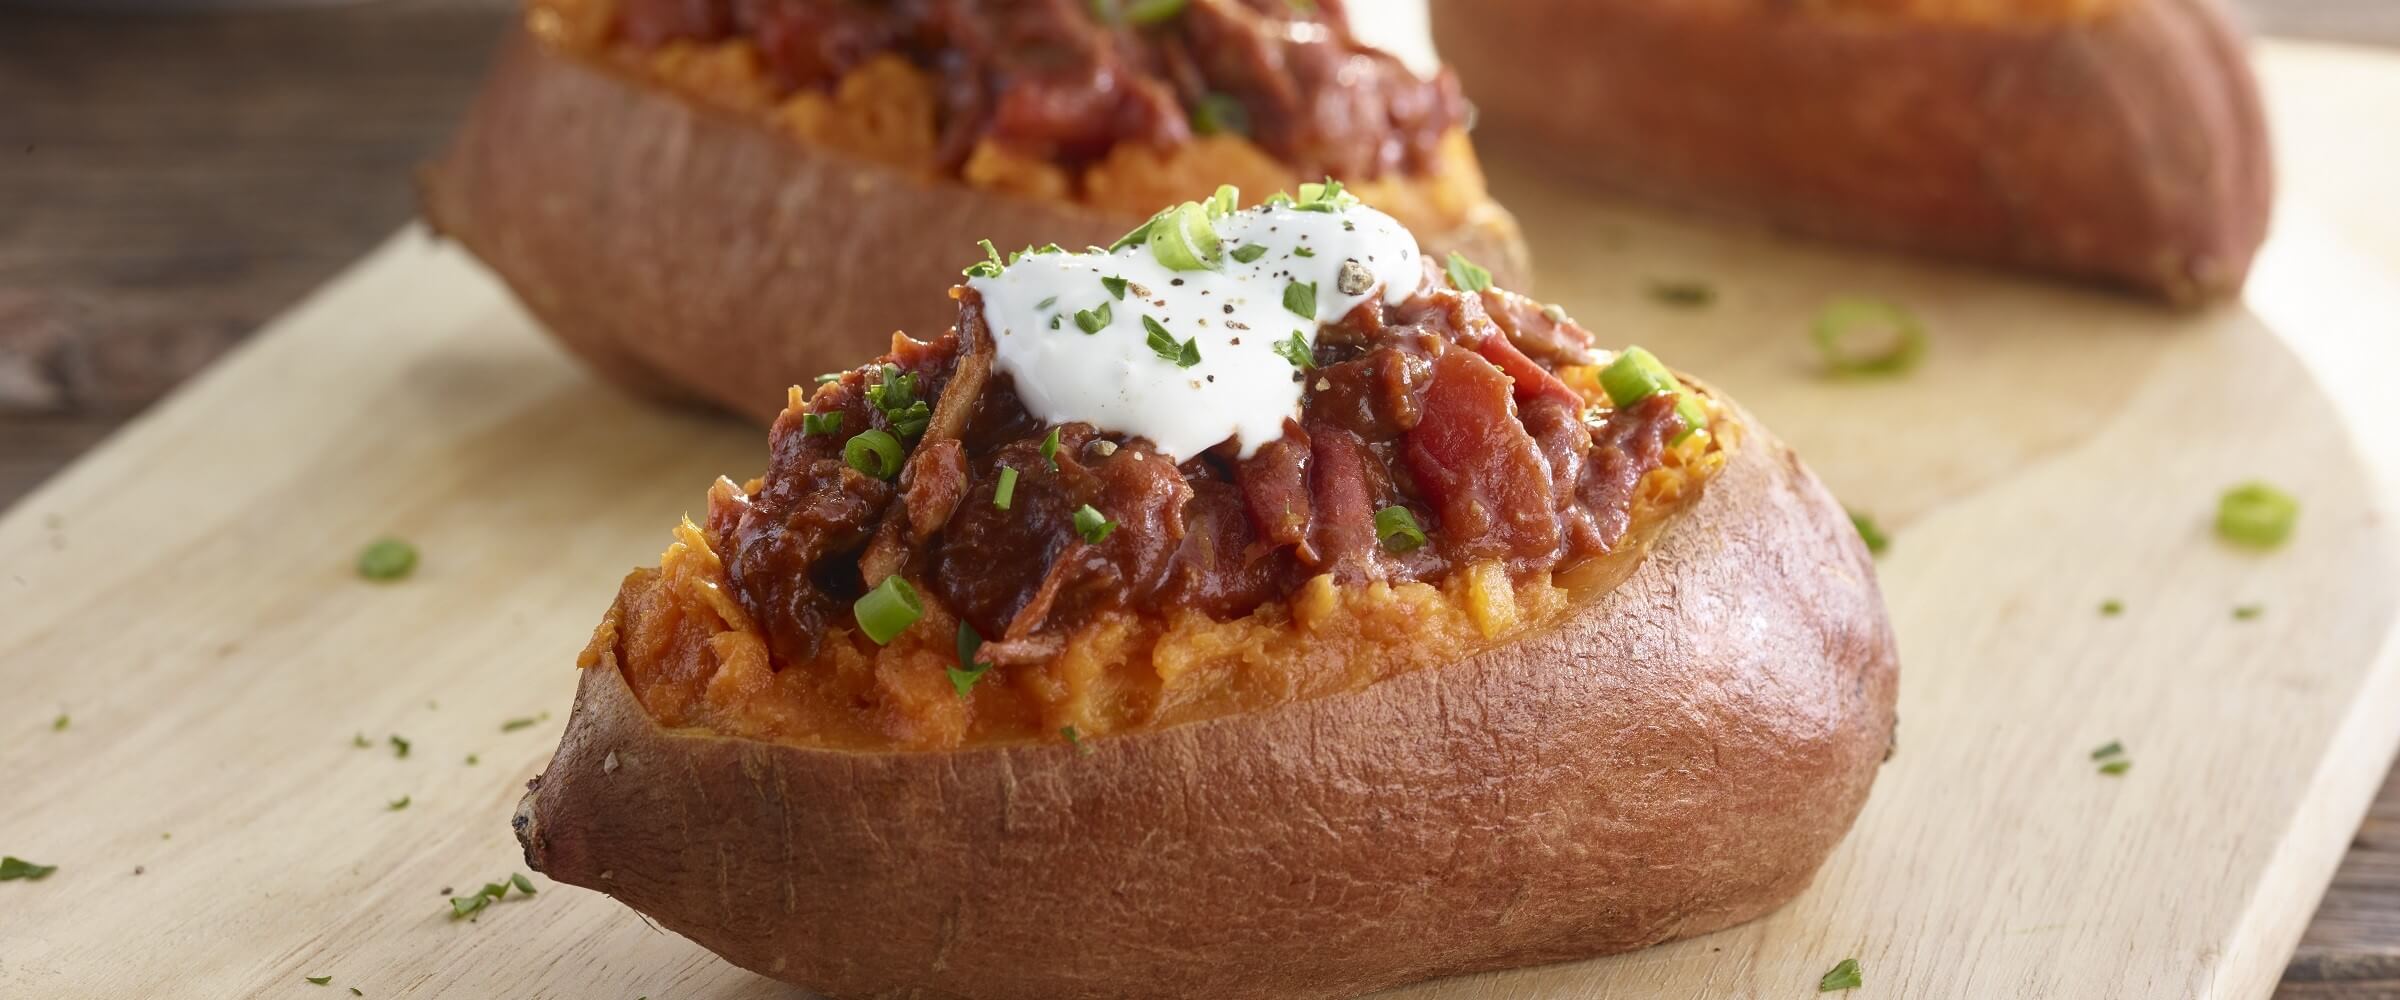 BBQ pulled pork stuffed sweet potato topped with sour cream on wood platter